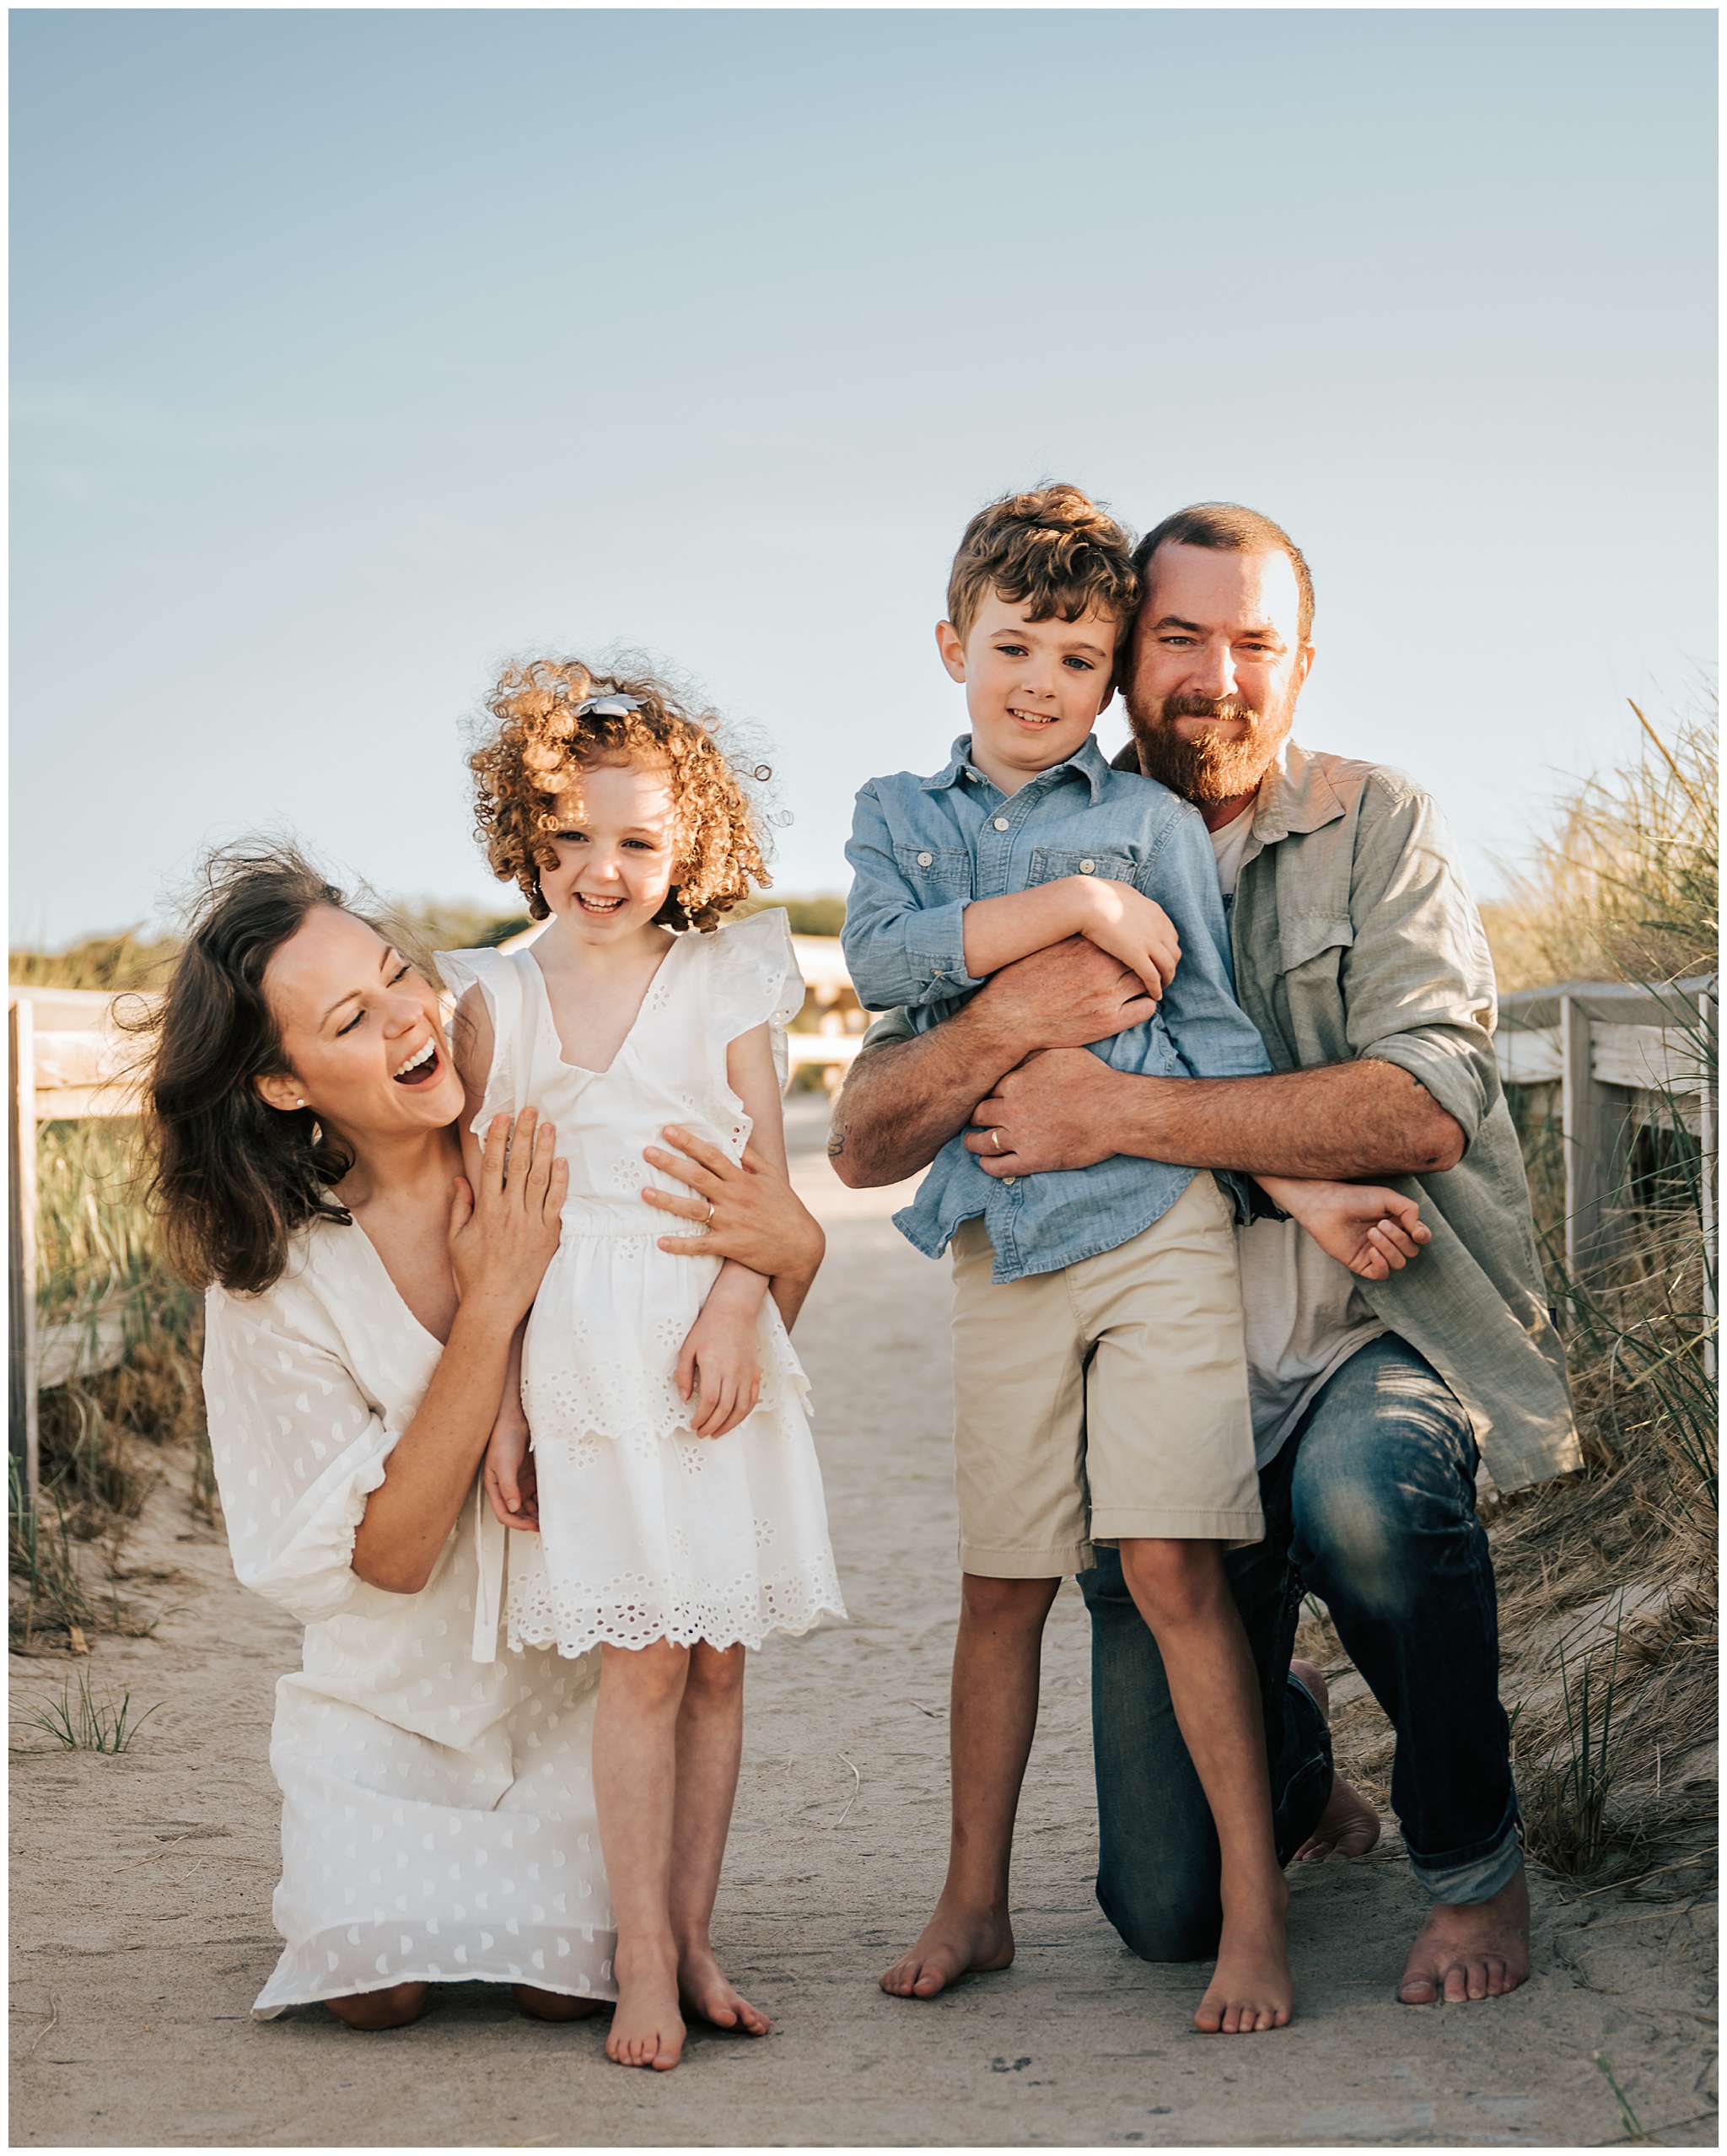 A professional family portrait of a young, smiling family at the beach in Ipswich, Massachusetts.